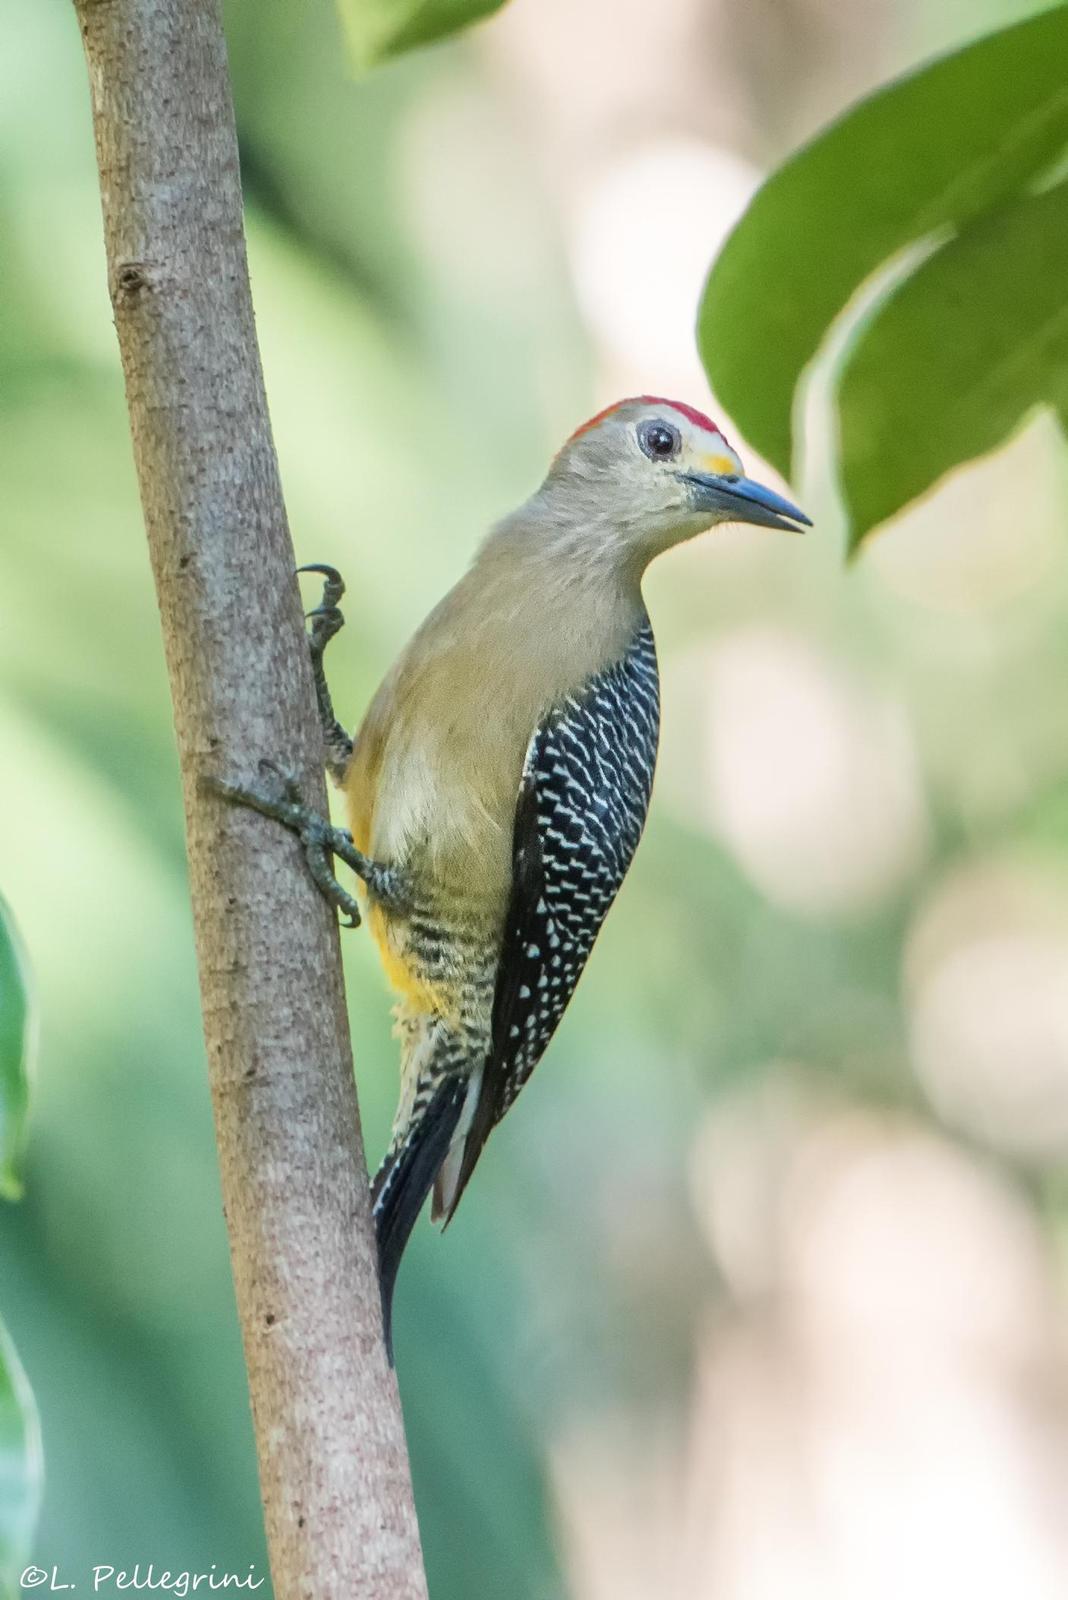 Golden-fronted Woodpecker Photo by Laurence Pellegrini